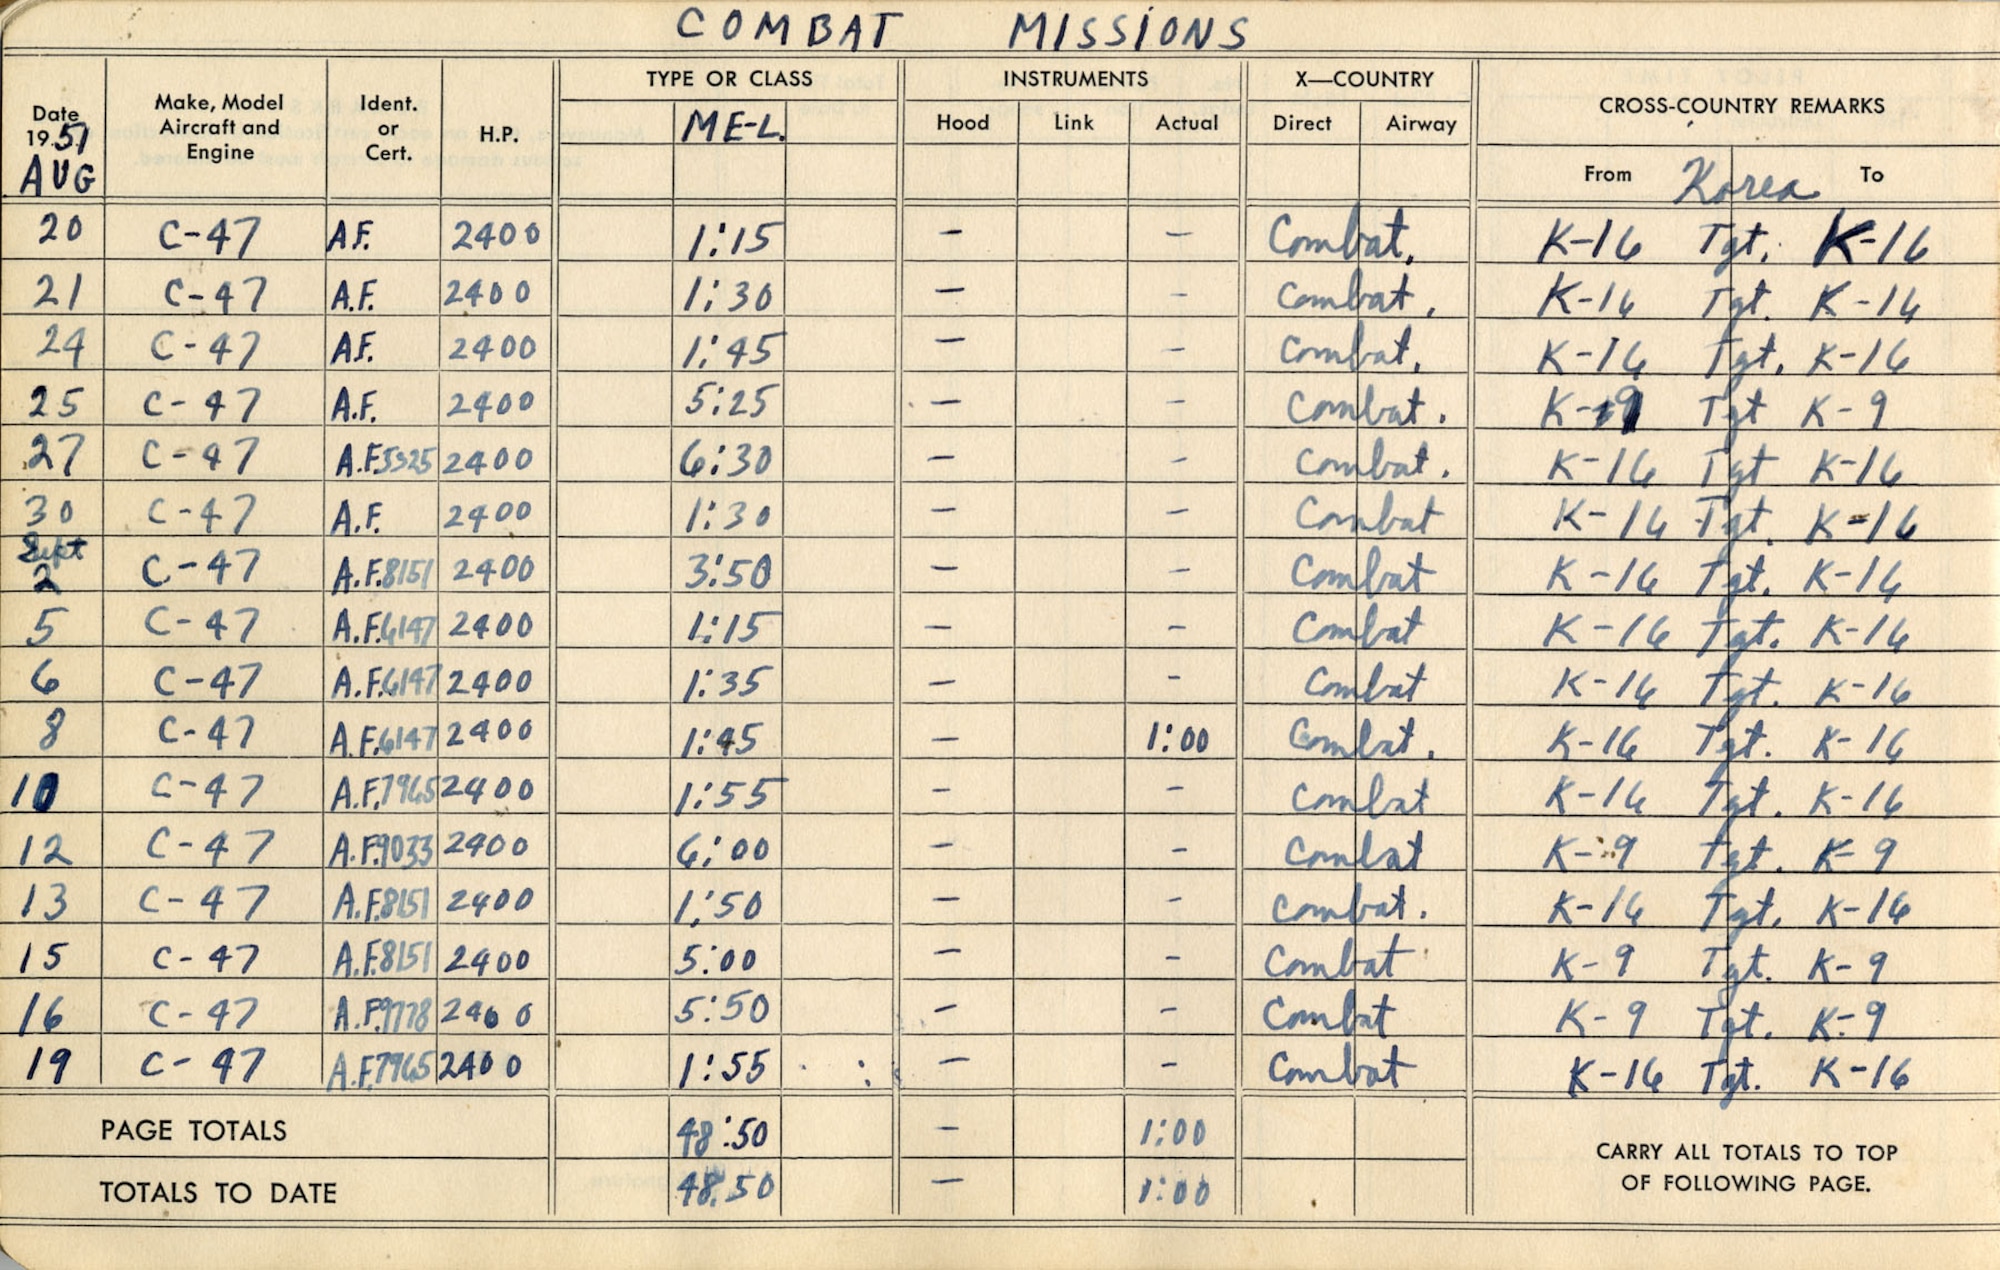 The first pages from 1st Lt. James Pragar’s combat flight log. The dates include his six-hour Distinguished Flying Cross mission on Sept. 12, 1951. The far right column lists the purpose of each mission. (U.S. Air Force photo)